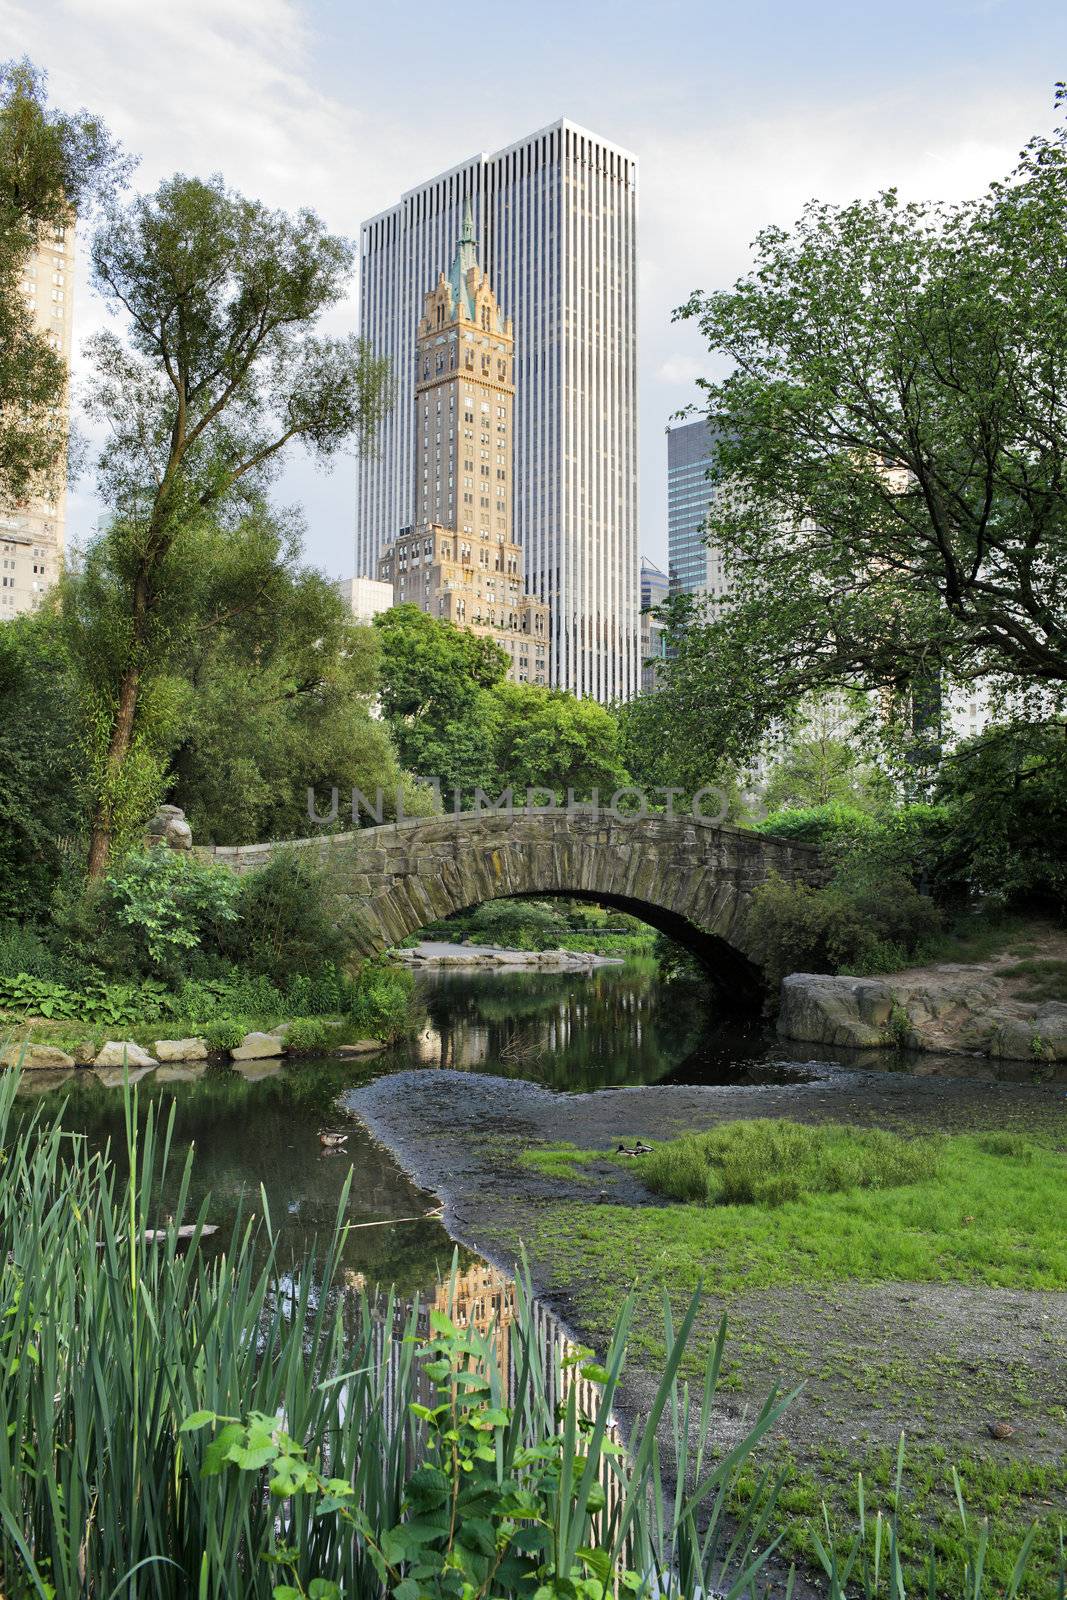 Gapstow bridge in Central Park. Central Park is a public park at the center of Manhattan, New York City, USA.